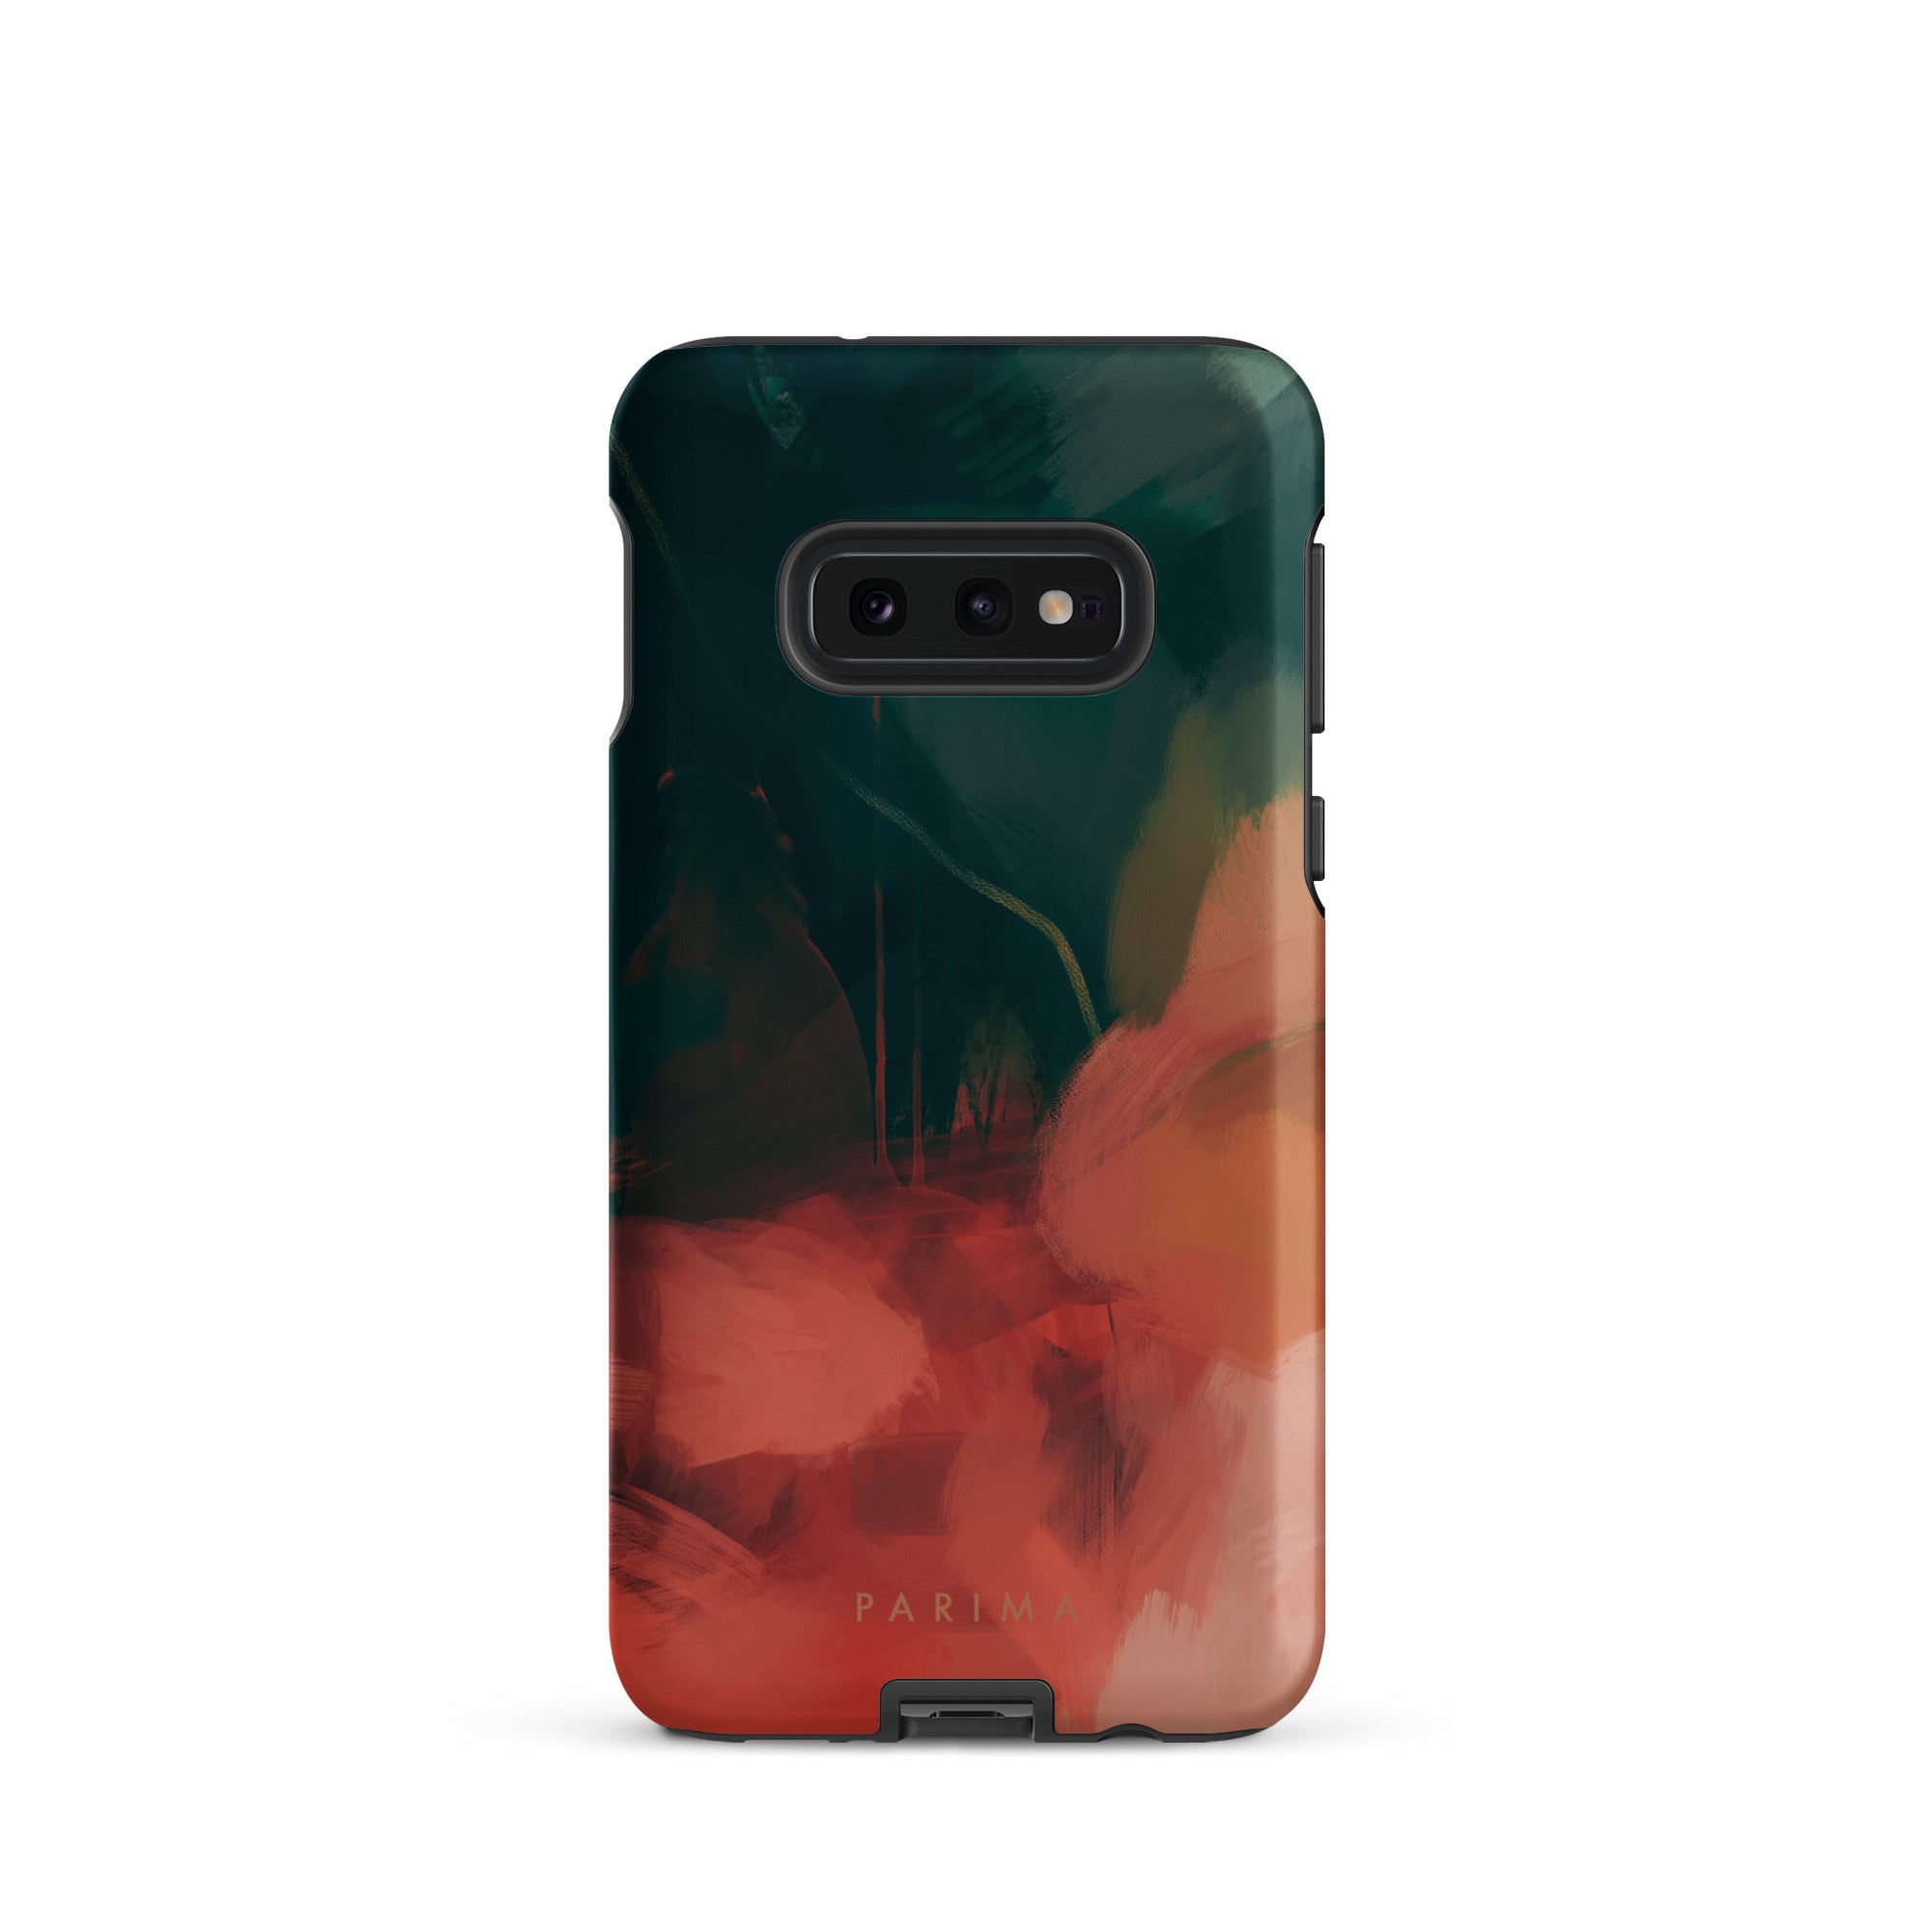 Eventide, green and red abstract art on Samsung Galaxy S10e tough case by Parima Studio